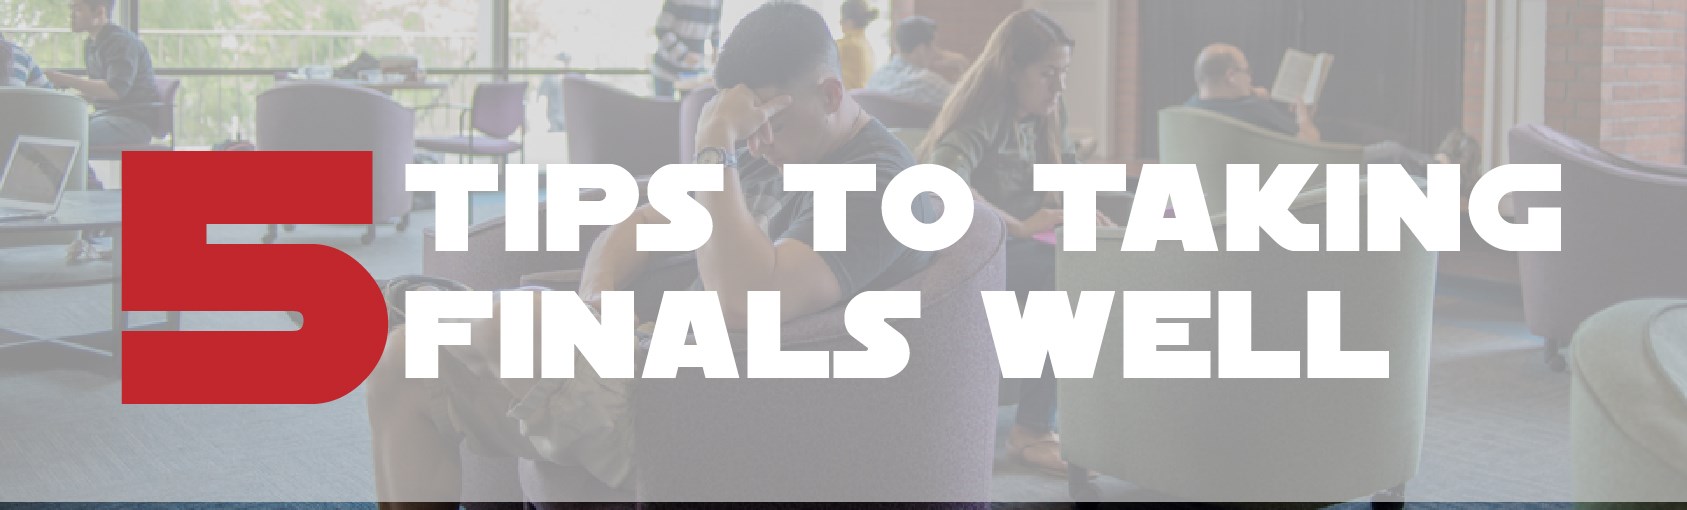 5 Tips on Taking Finals Well banner